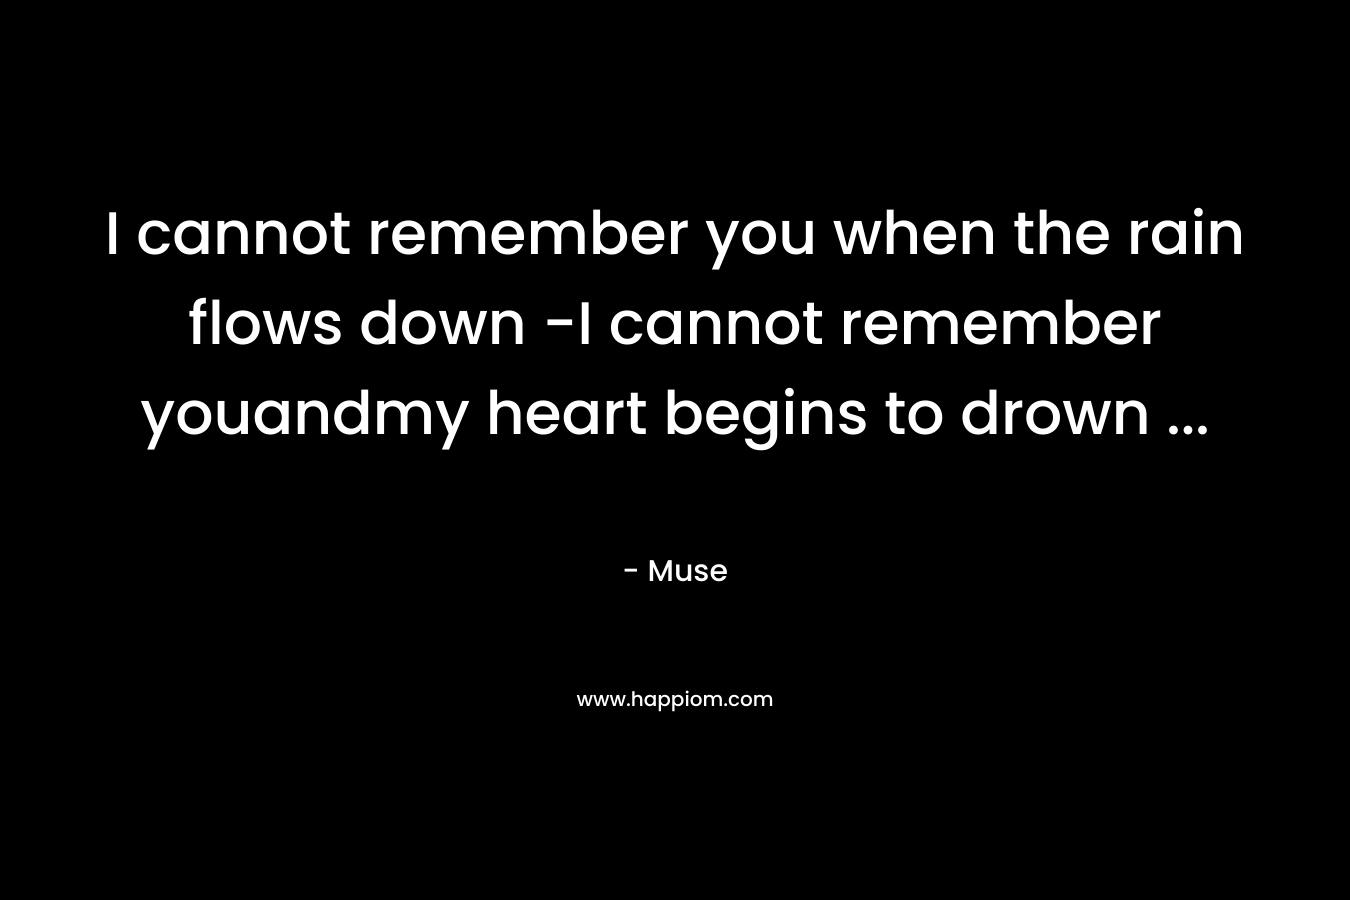 I cannot remember you when the rain flows down -I cannot remember youandmy heart begins to drown ...